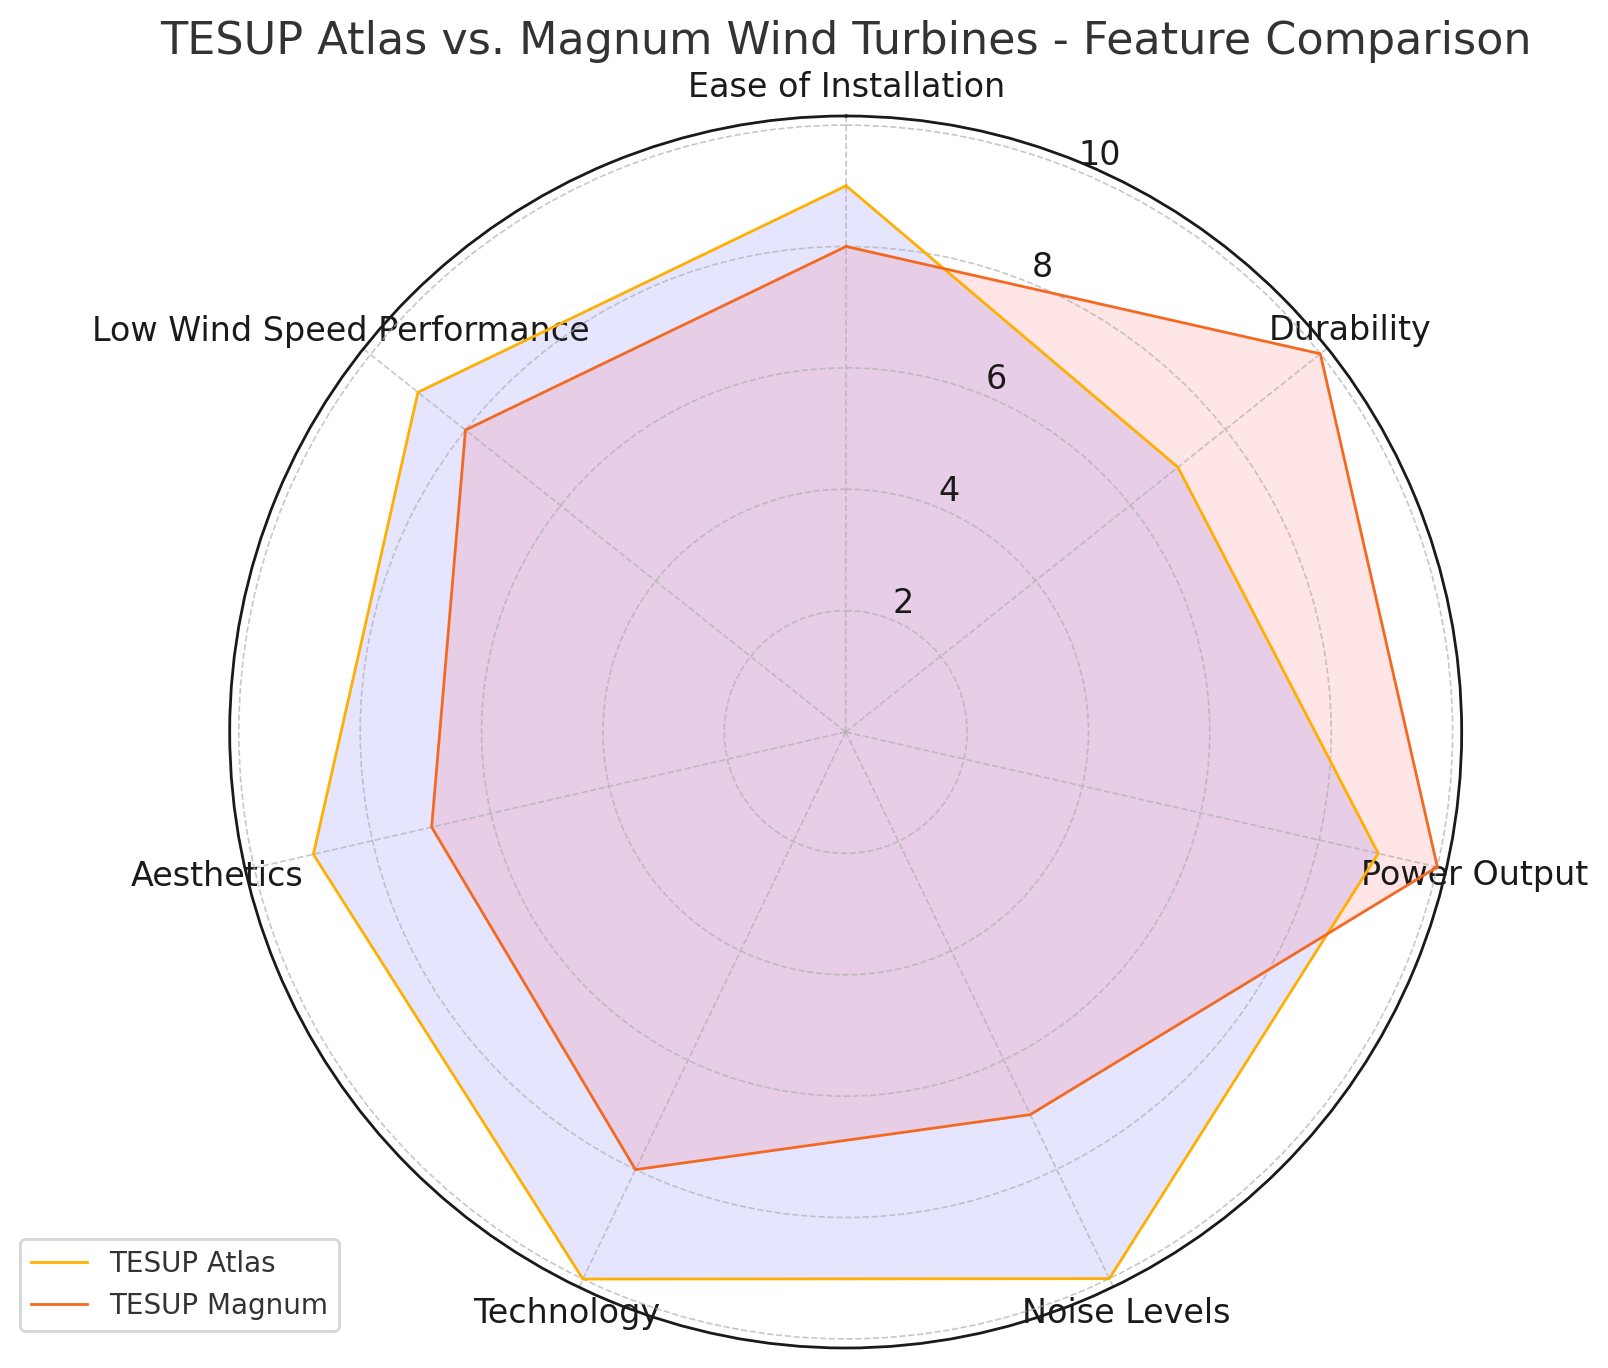 TESUP Atlas vs. TESUP Magnum Prices Over the Years